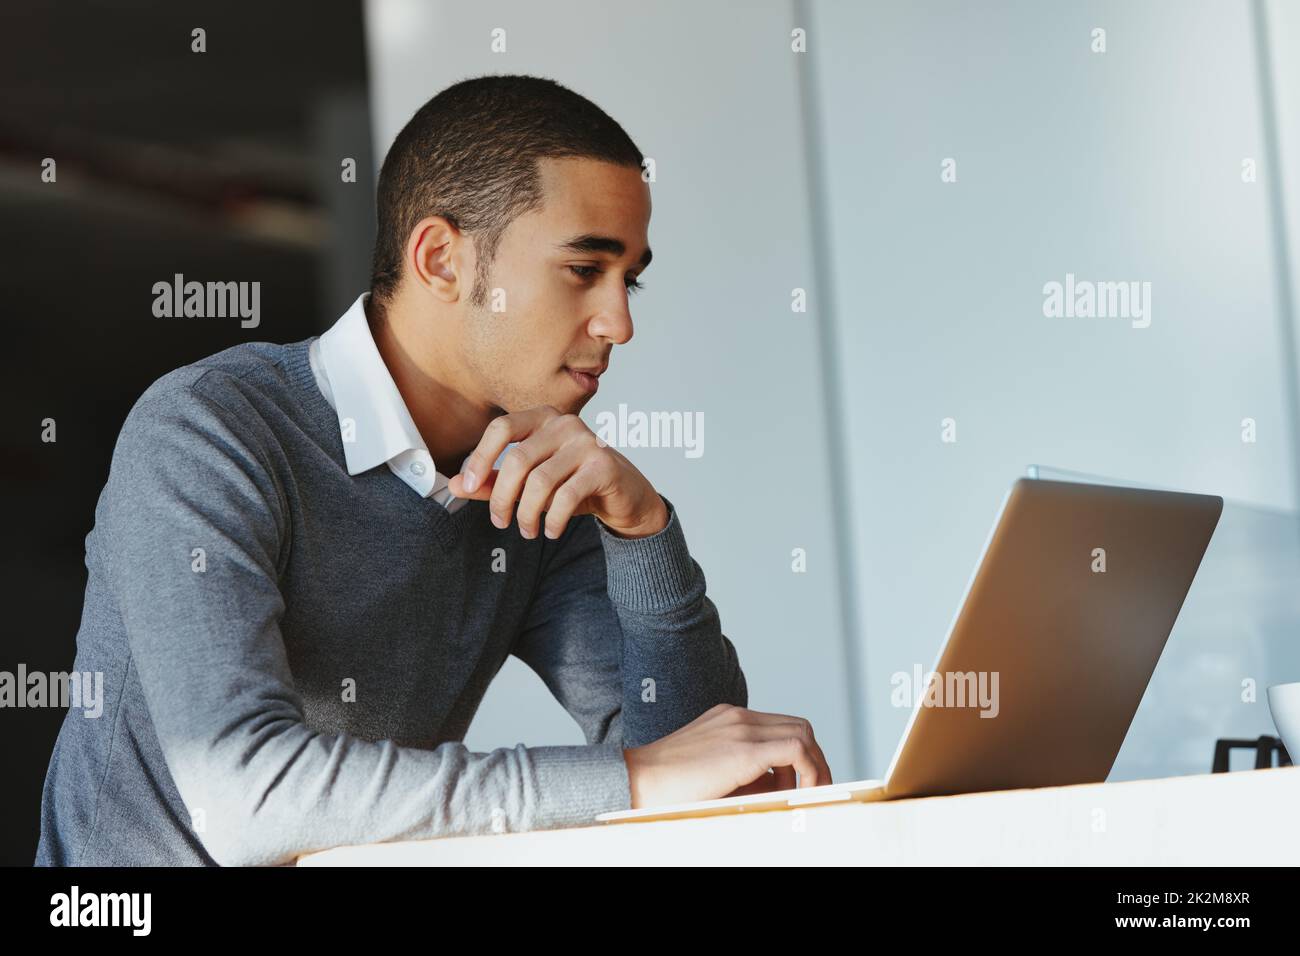 Low angle view of a Black businessman working on a laptop Stock Photo